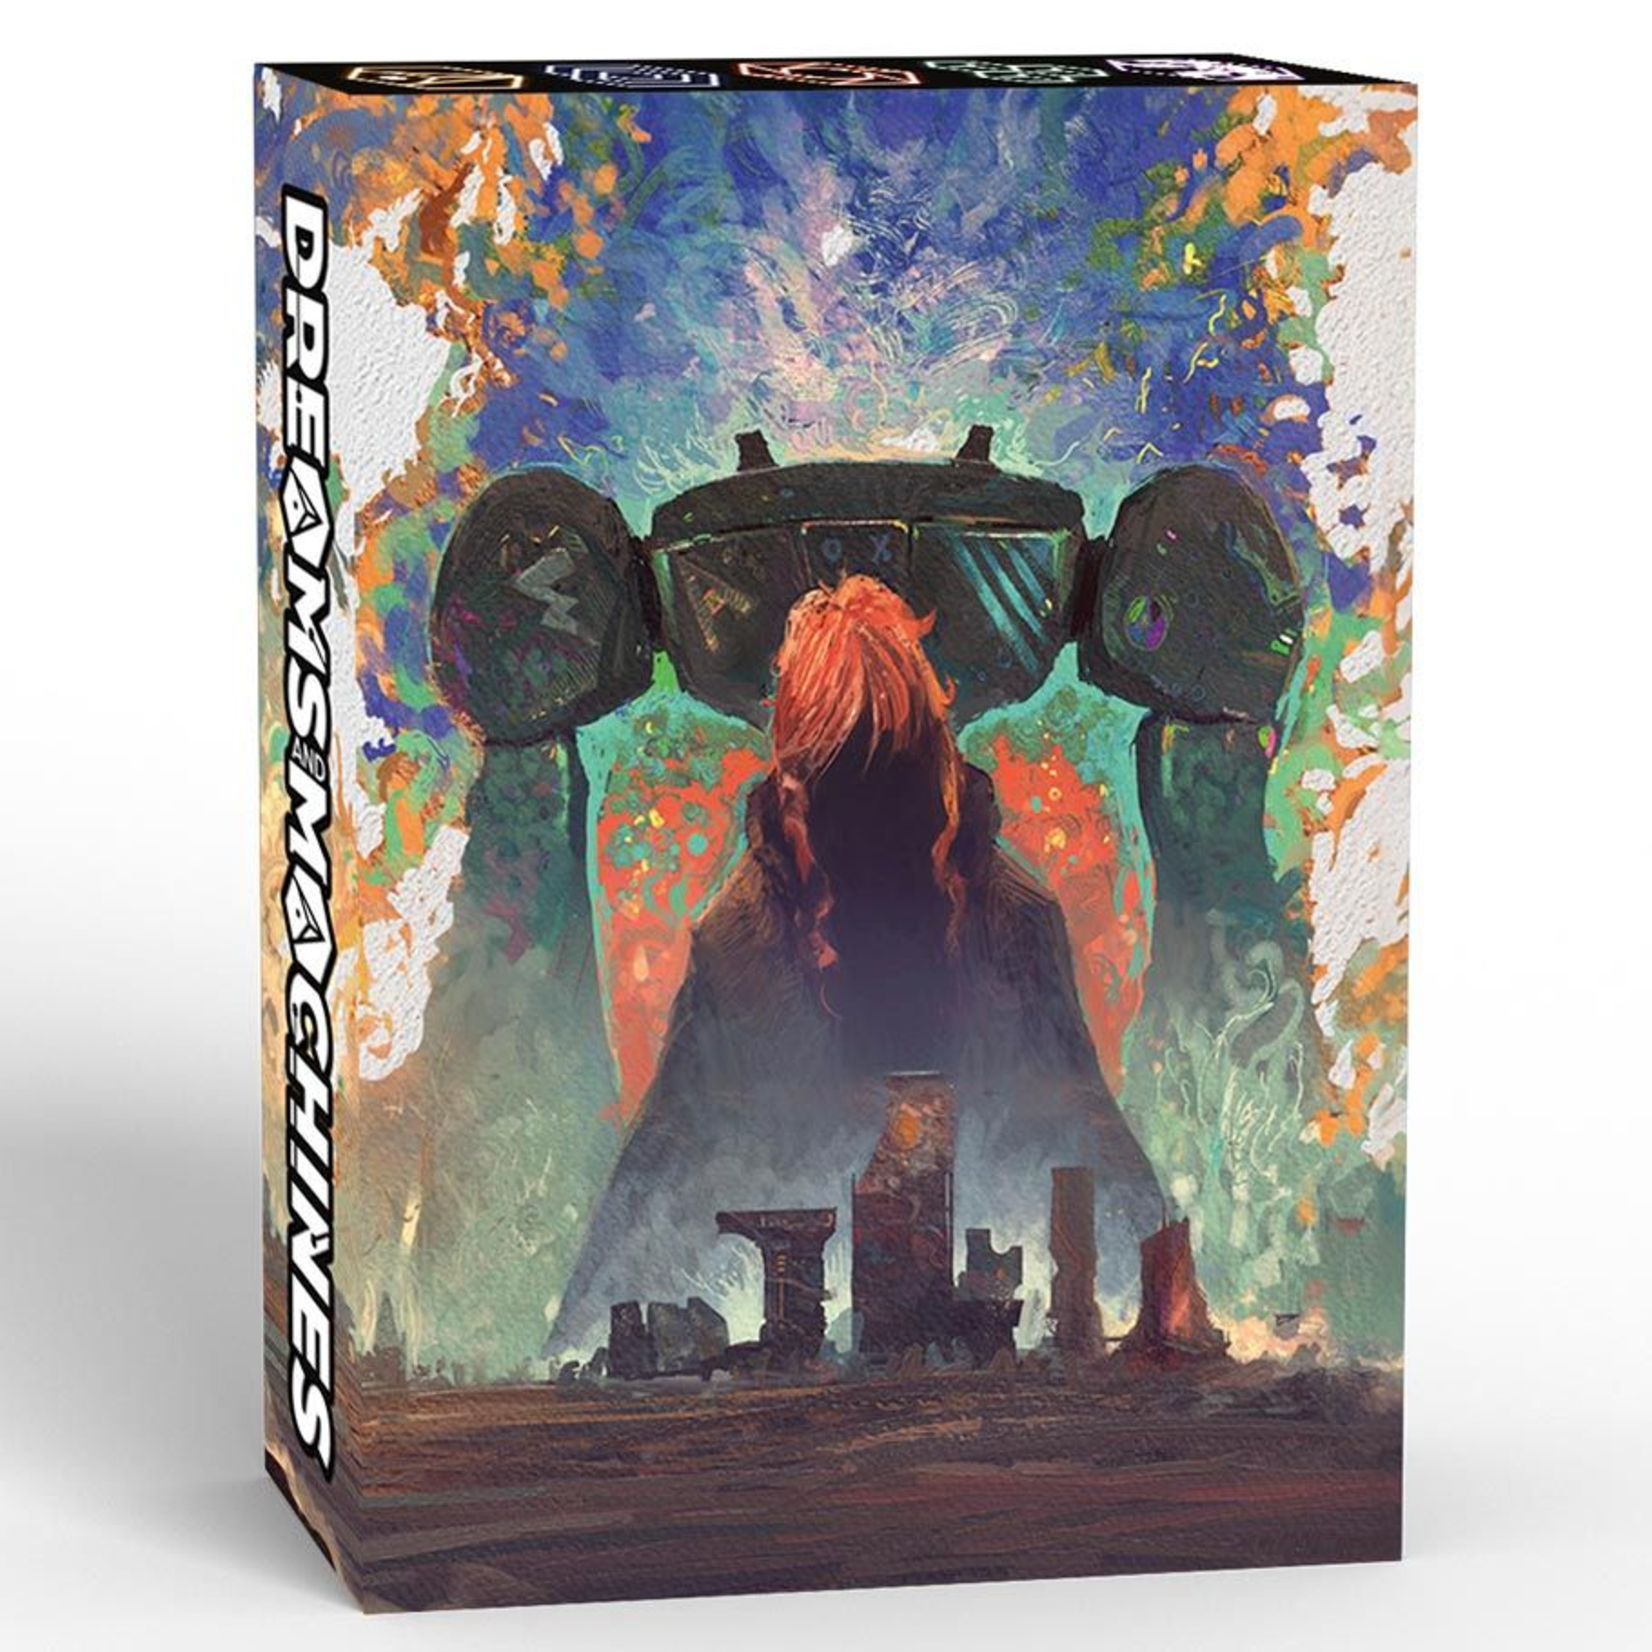 Modiphius Dreams and Machines Collector's Edition Slipcase